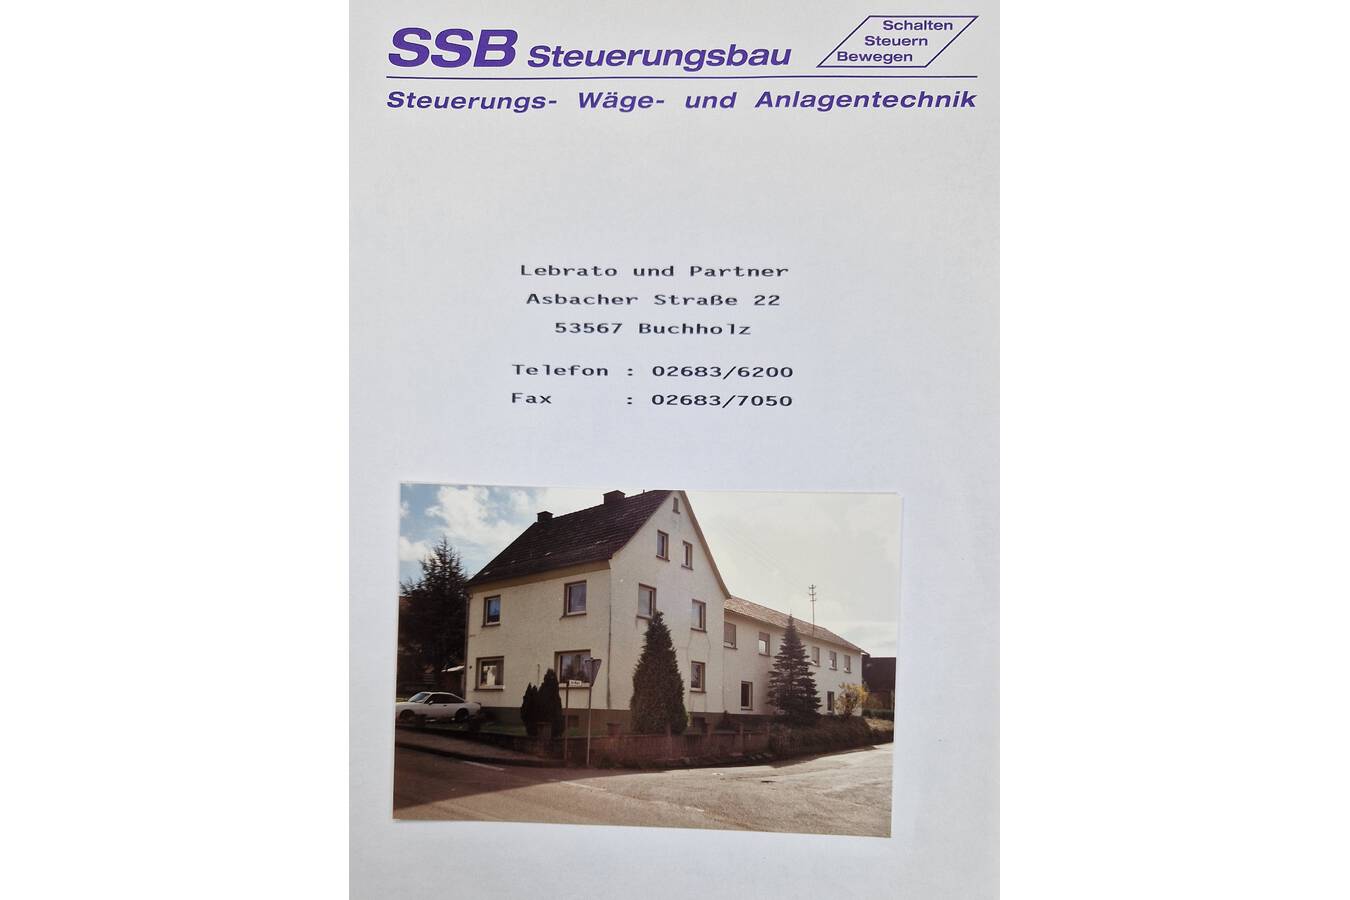 Foundation day on 22.11. of SSB Wägetechnik Our foundation 31 years ago and more about our company history